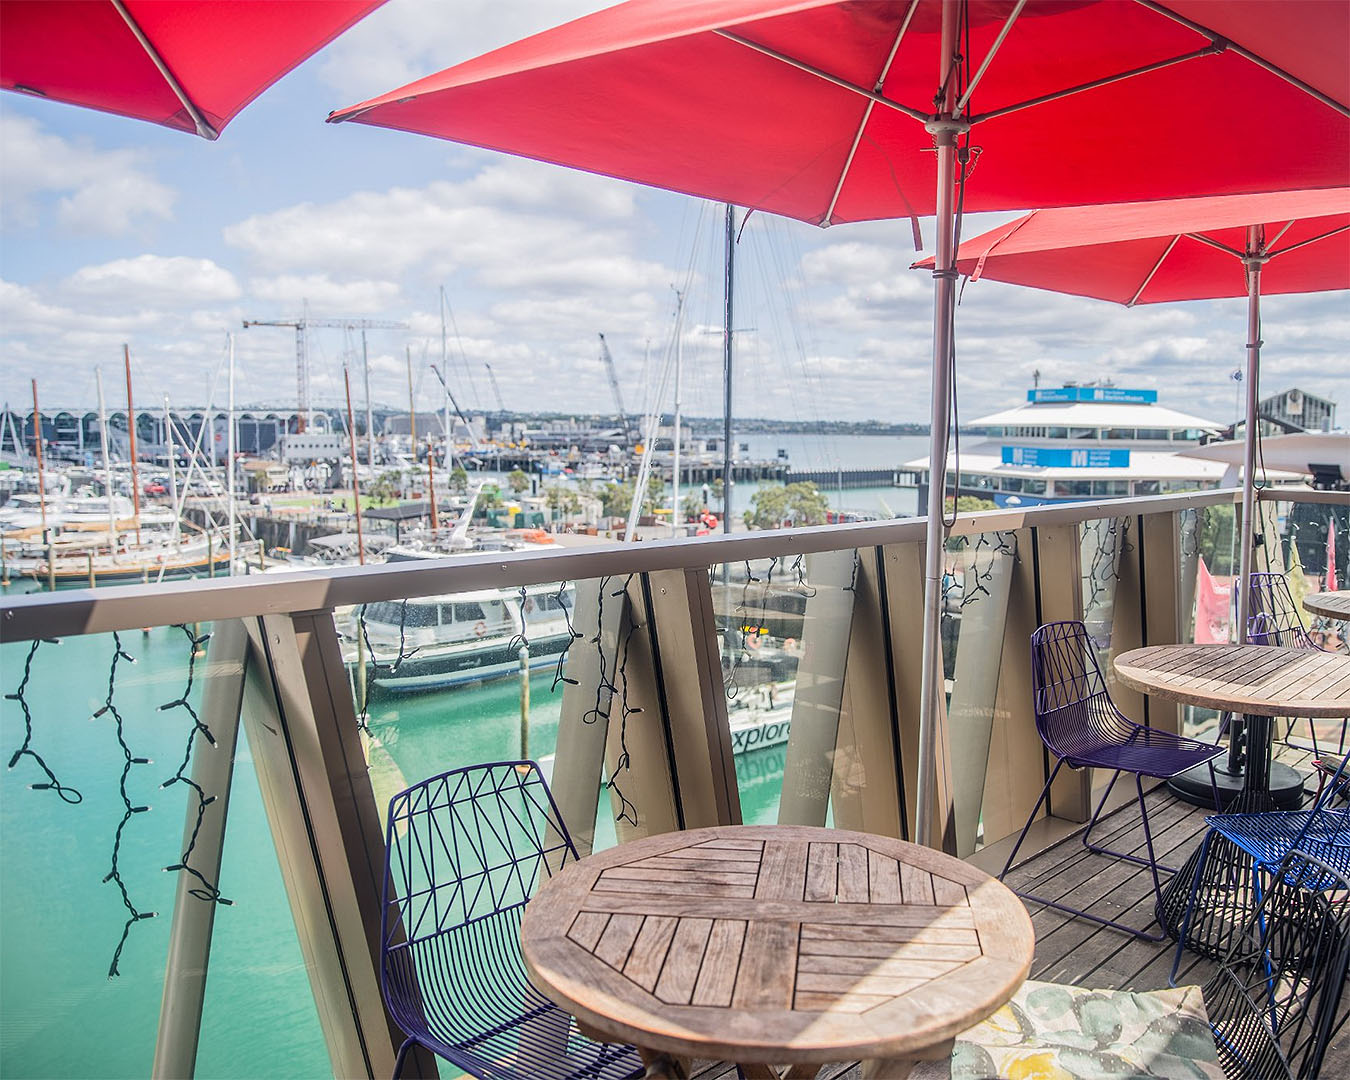 The deck at Parasol and Swing looks over Auckland viaduct looking inviting. No wonder this is one of the best rooftop bars in Auckland.